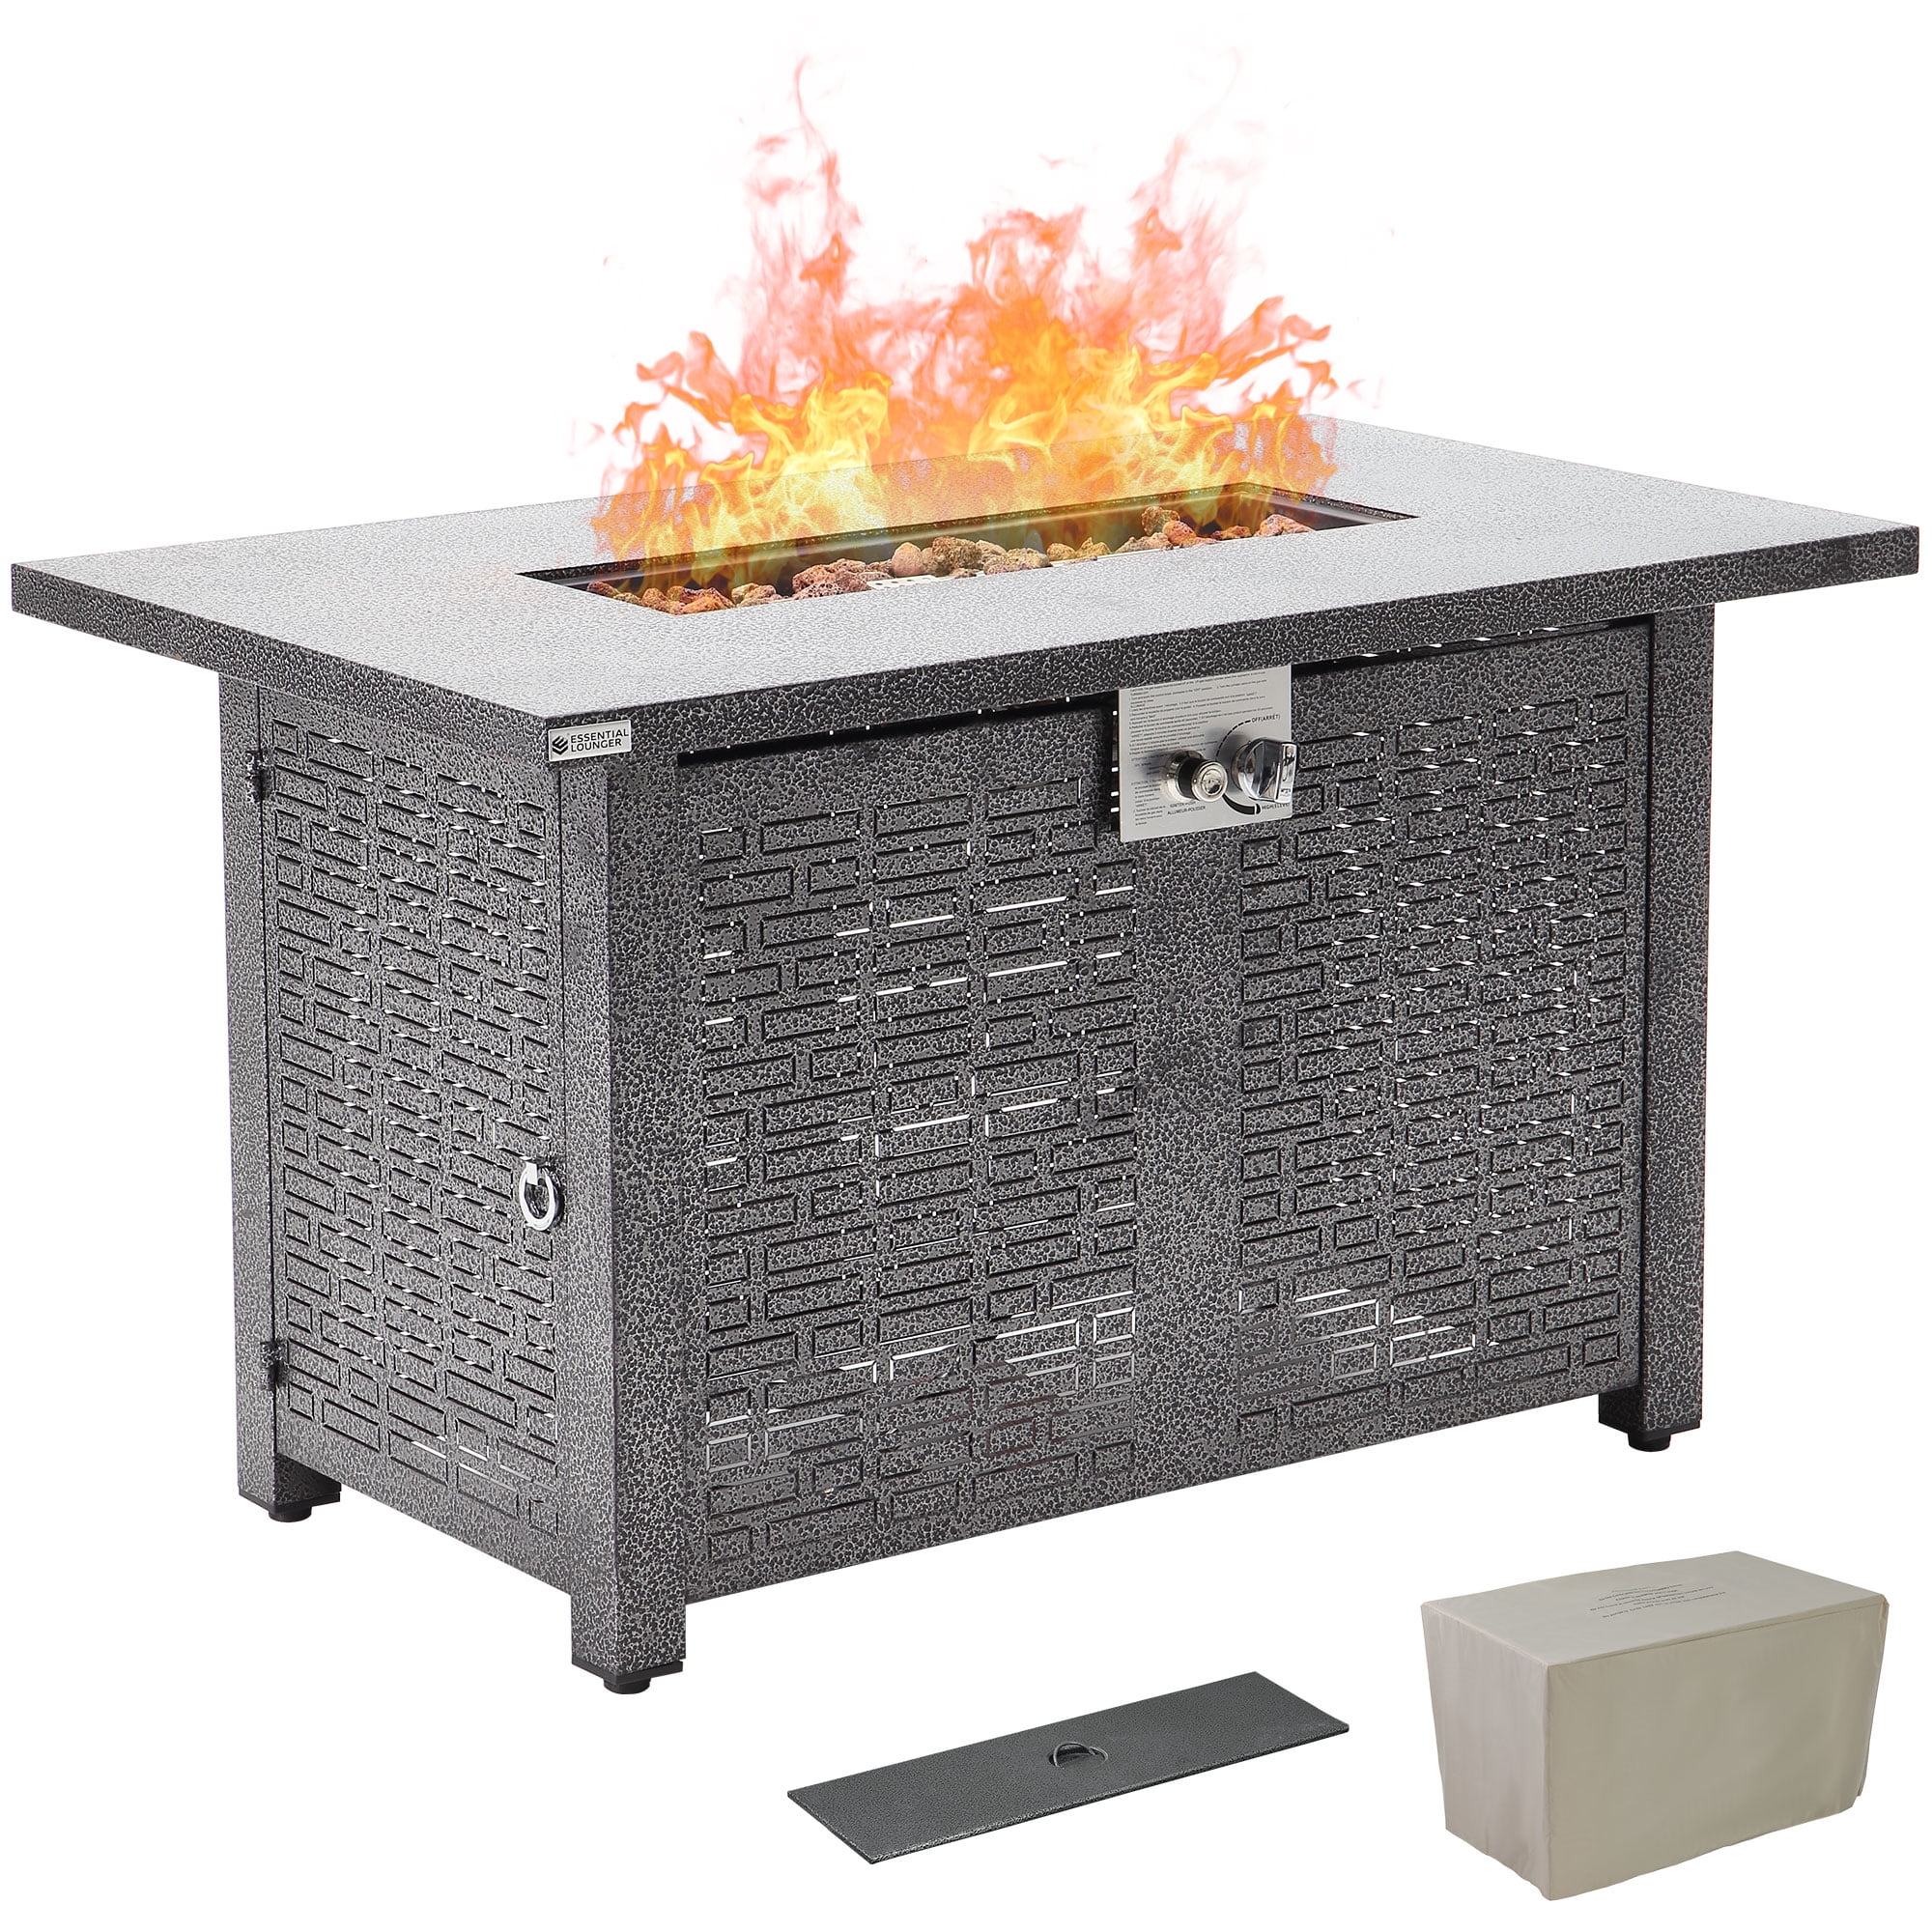 Cozyhom 42 Inch Propane Gas Fire Pit, Propane Fire Pit Table With Lid